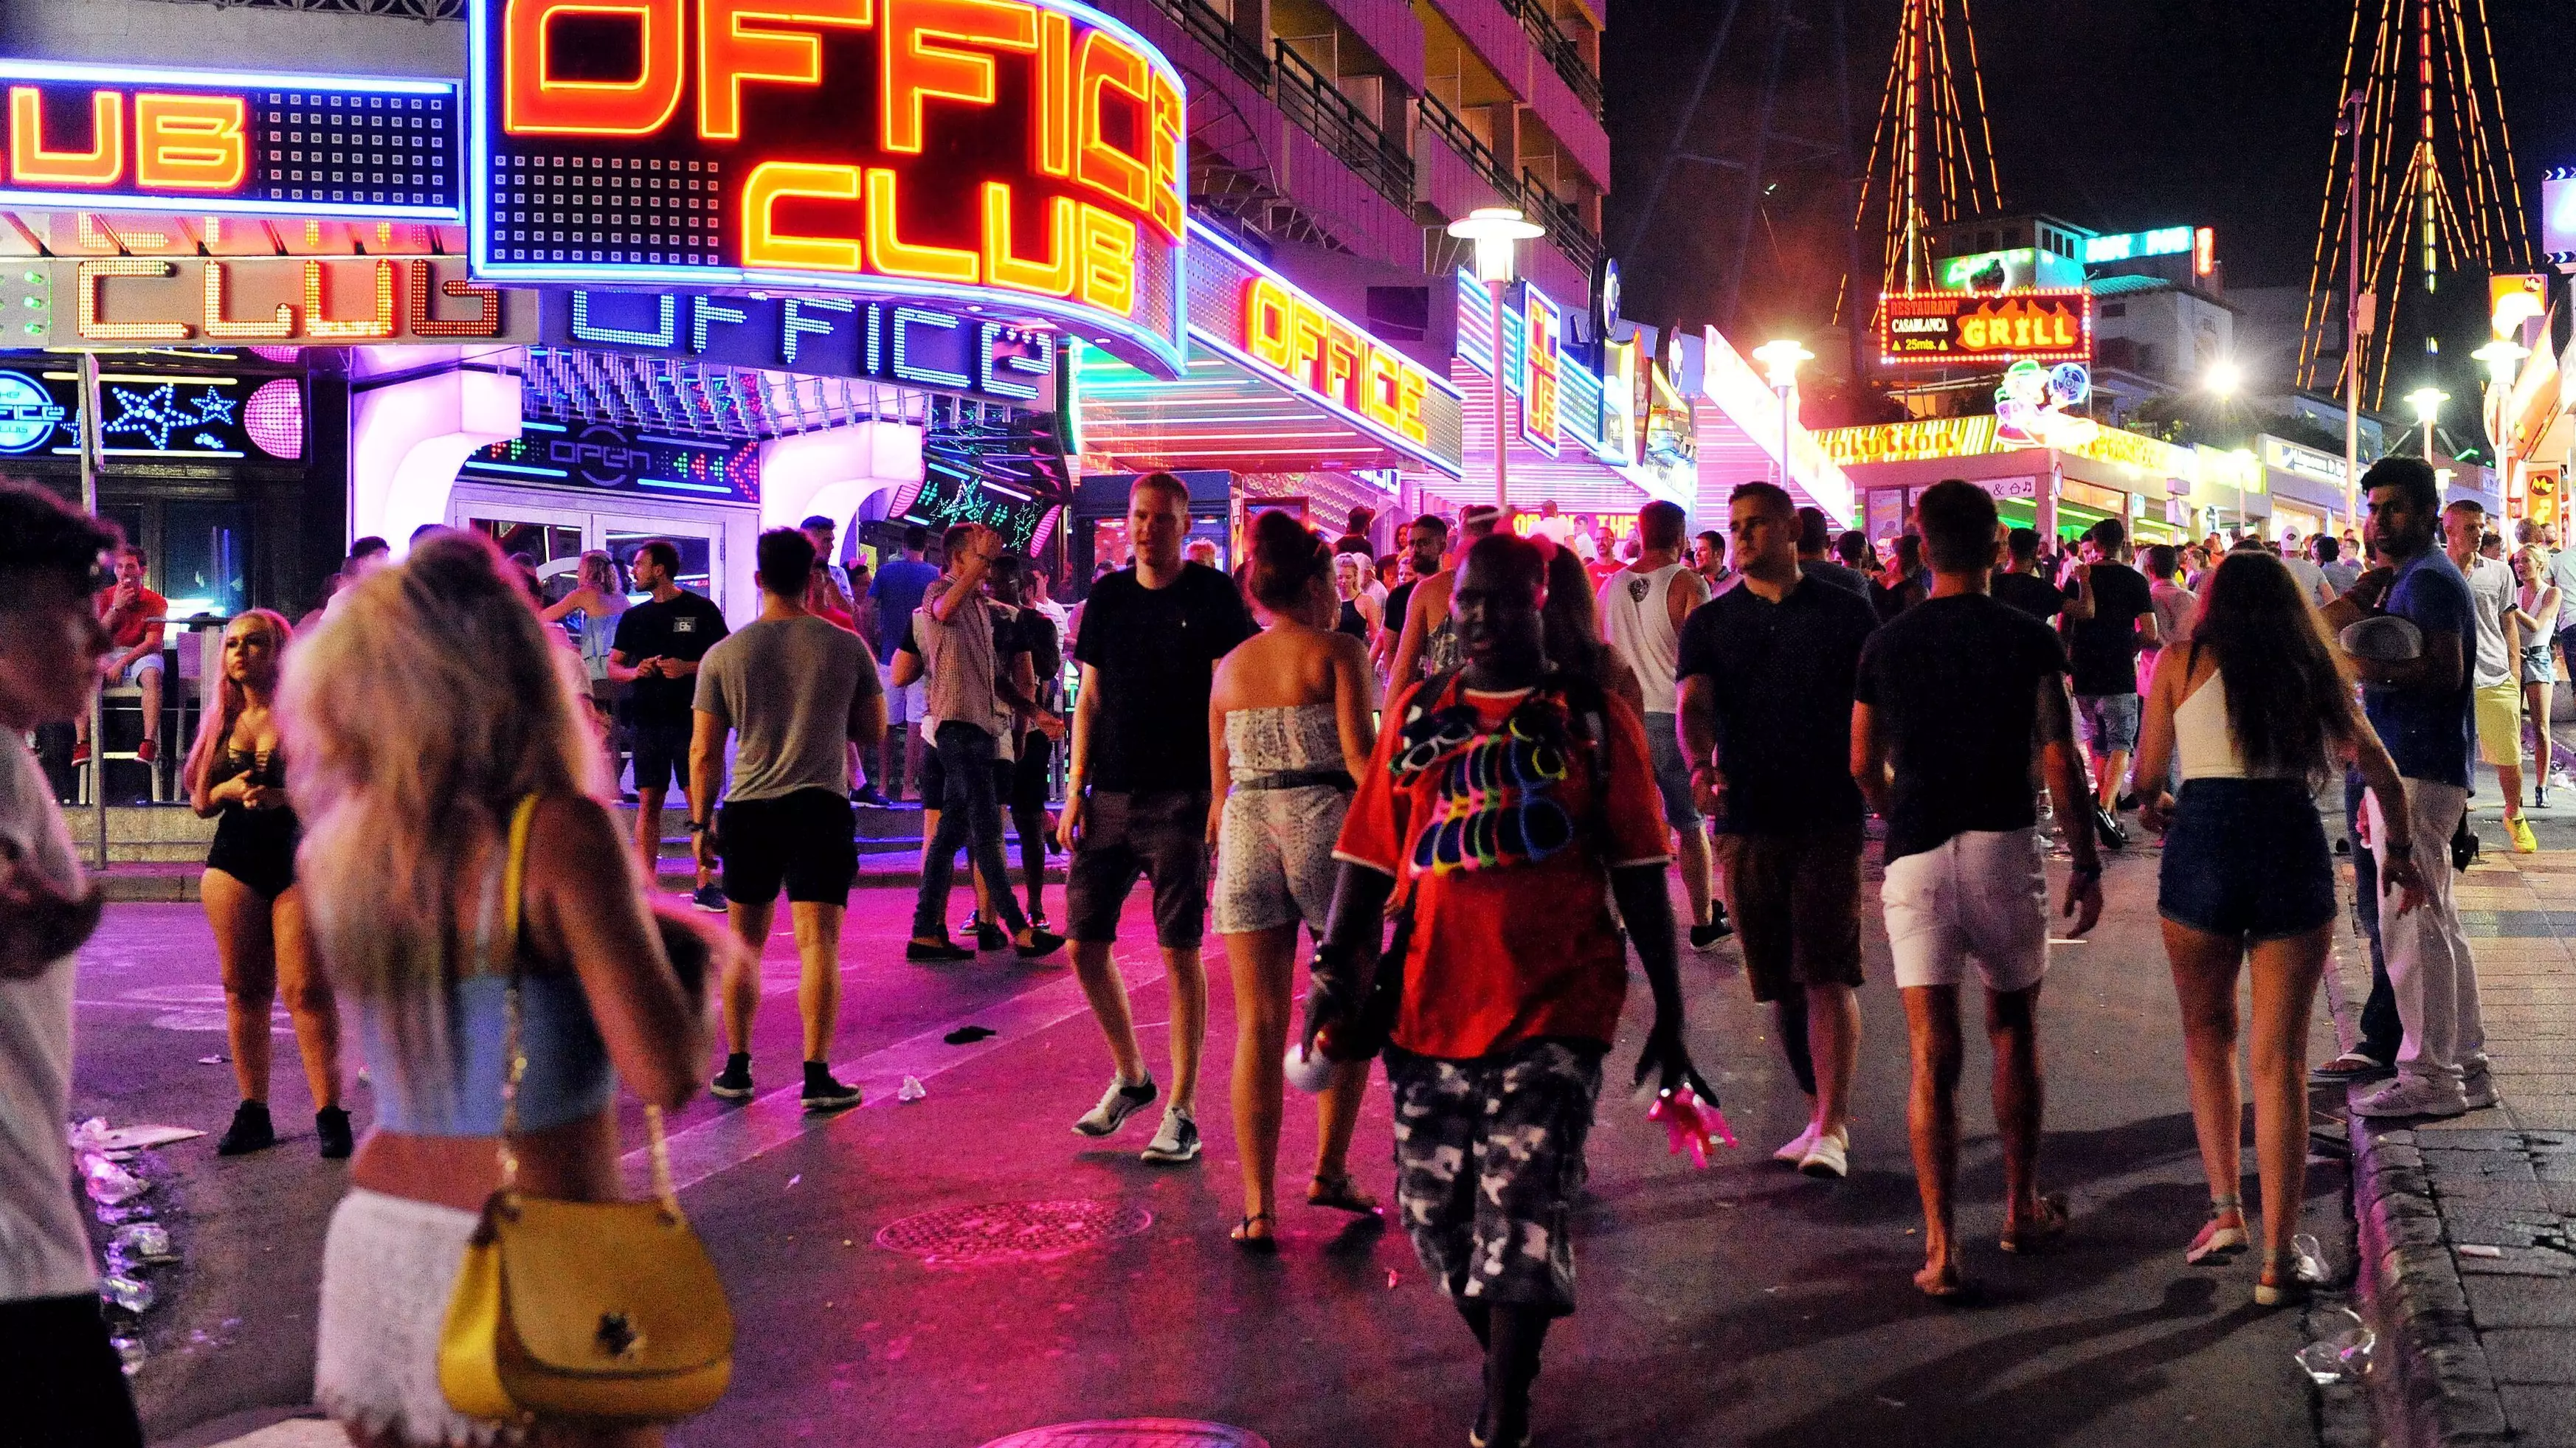 Ibiza And Magaluf Introduce New Laws Banning Pub Crawls And Happy Hours 